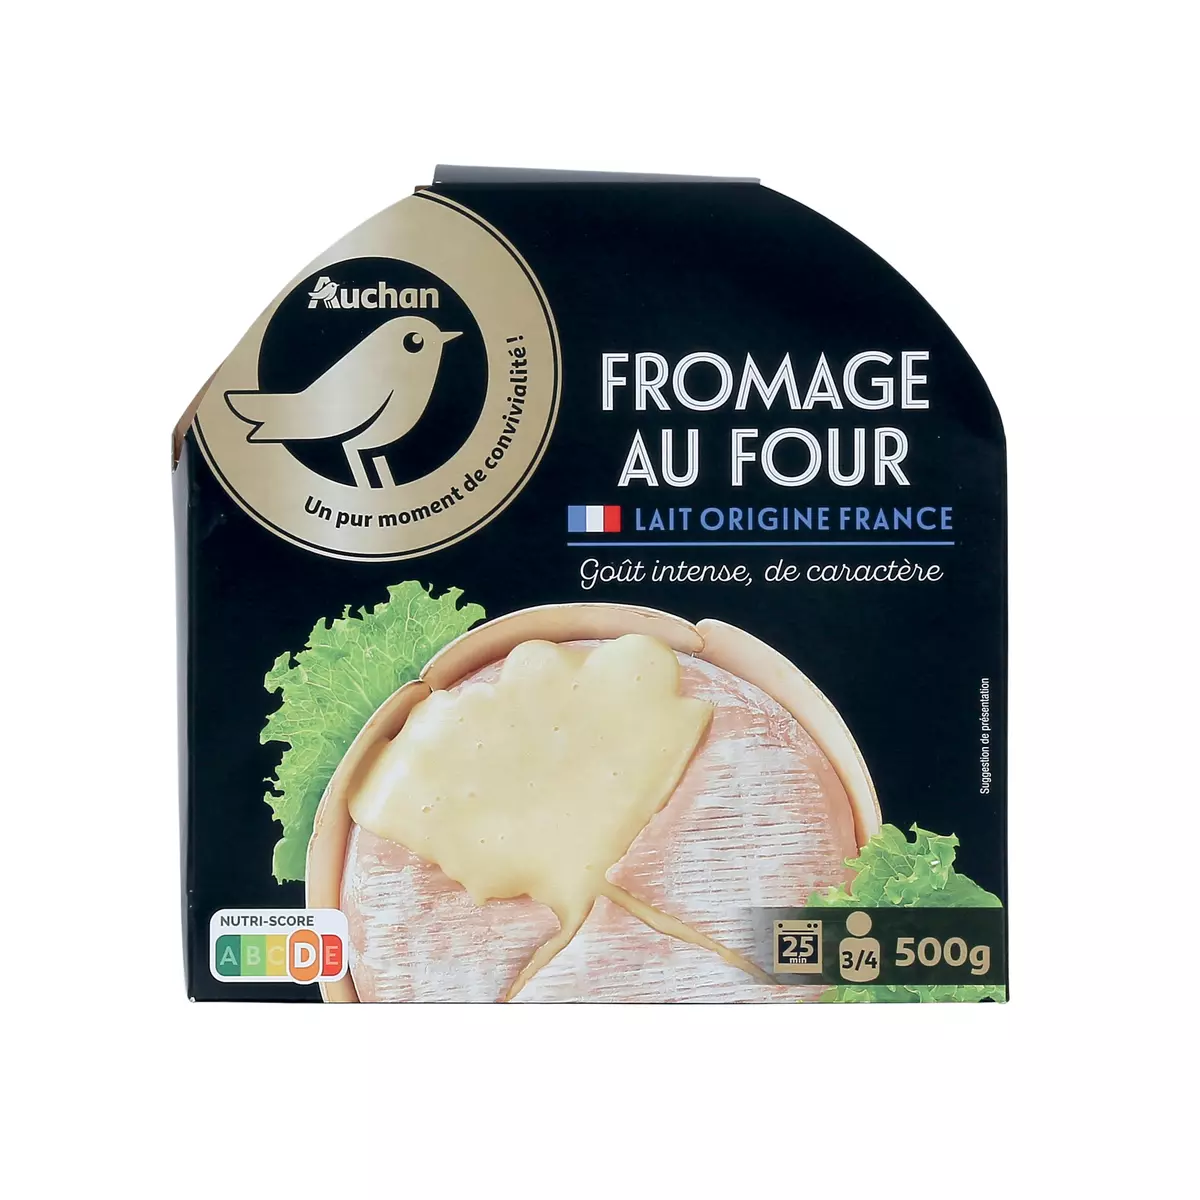 AUCHAN GOURMET Fromage au four 3-4 portions 500g